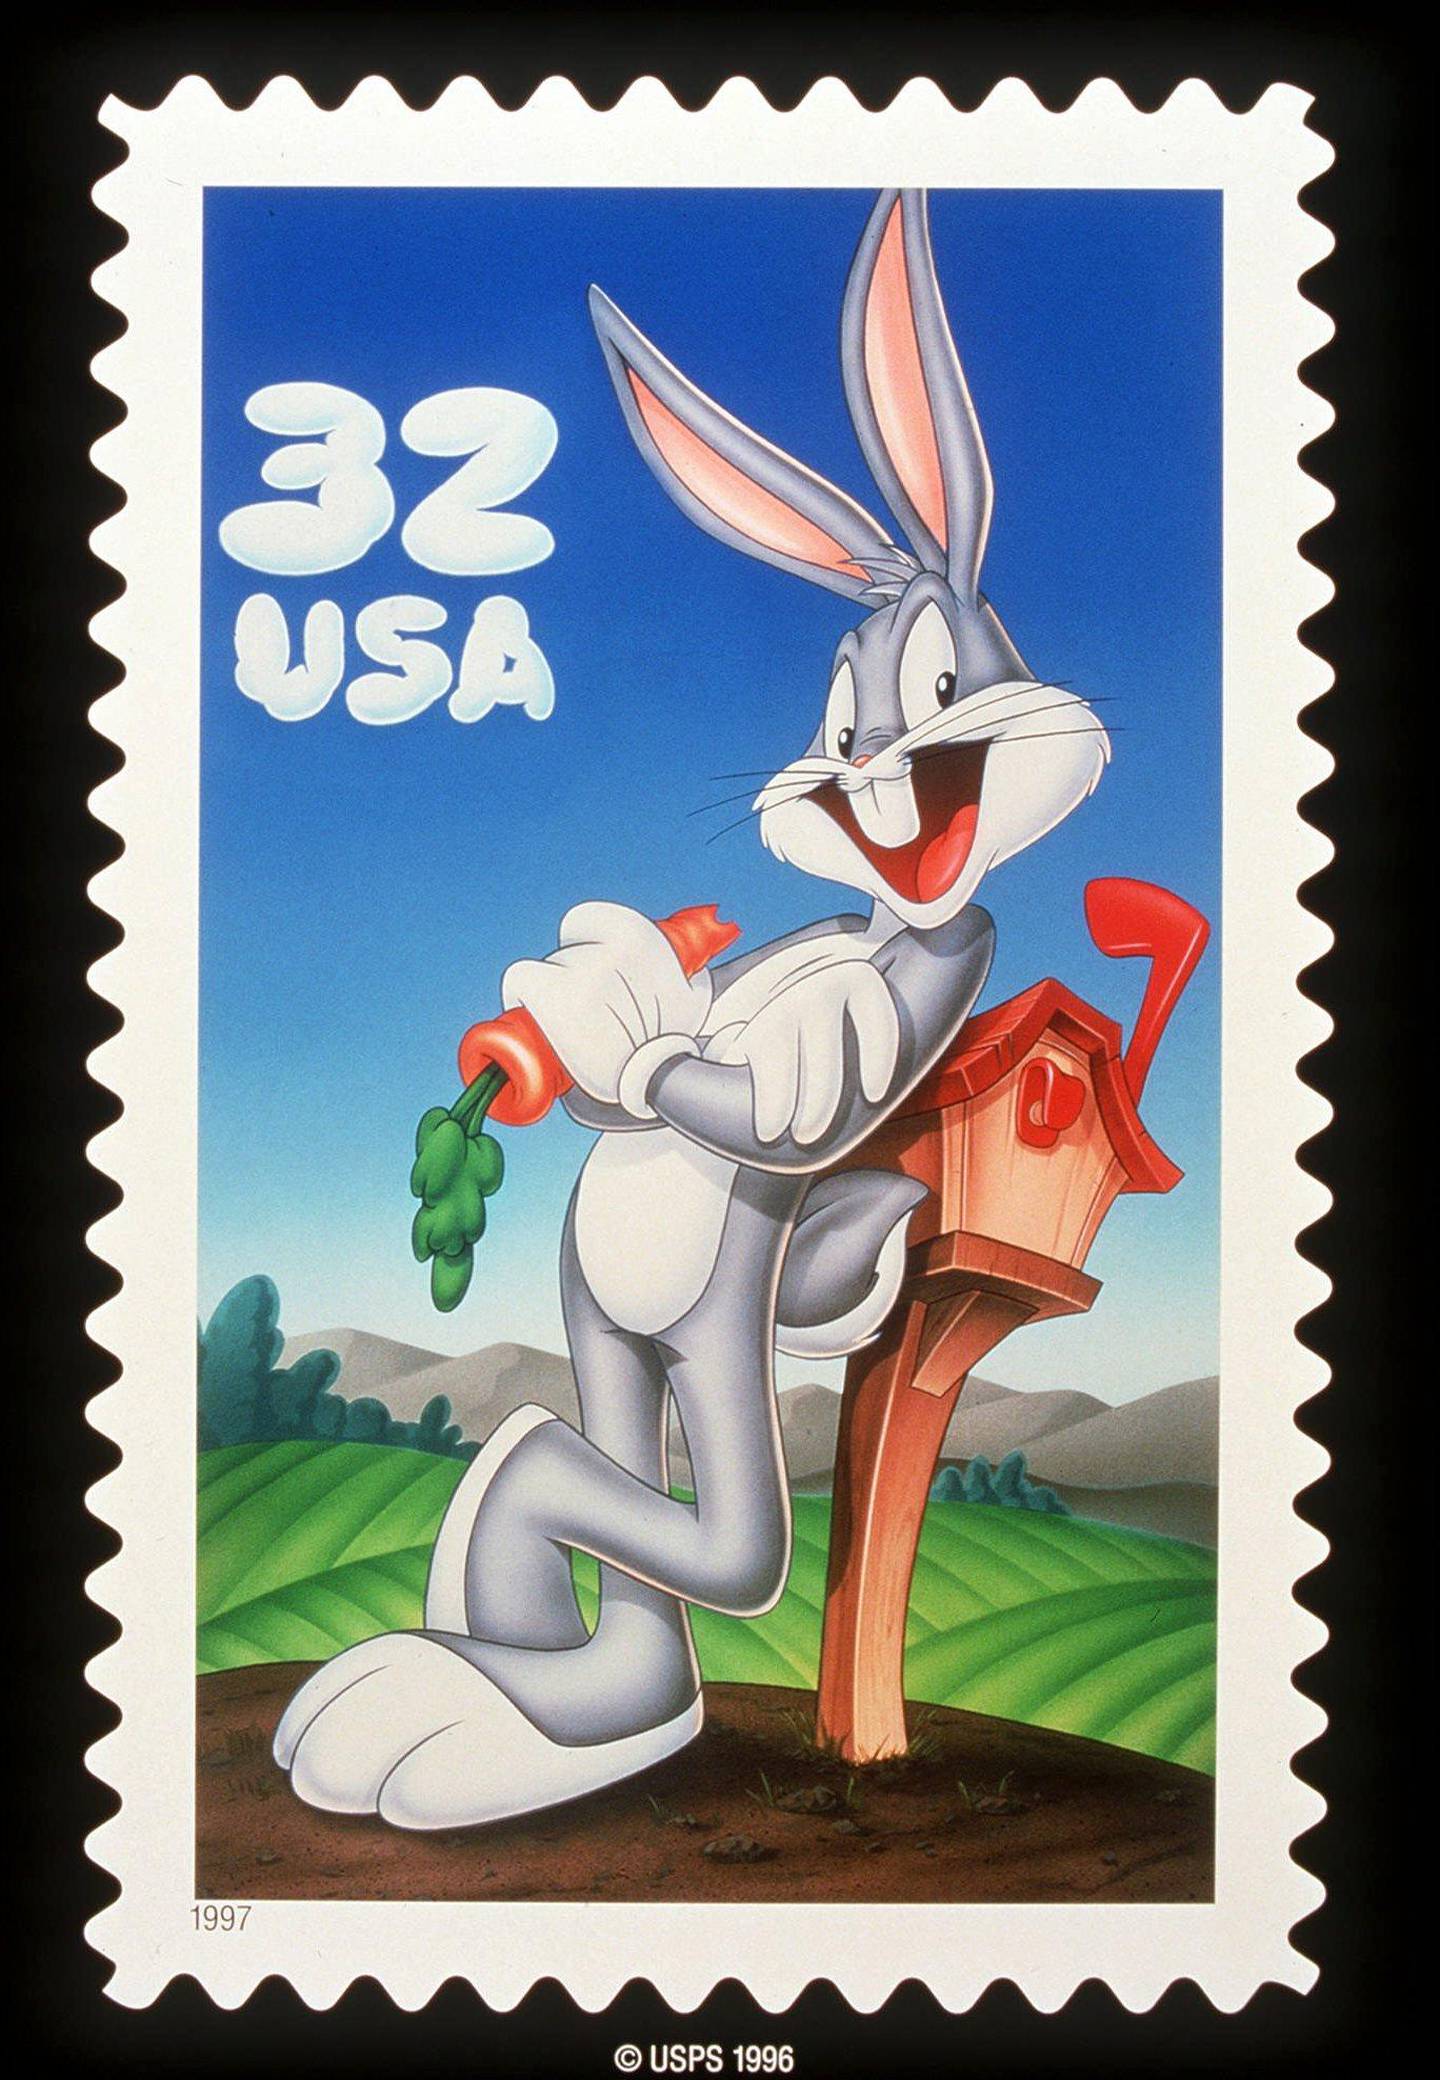 
"What's Up Doc?"  The United States Postal Service is scheduled to dedicate its new Bugs Bunny stamp on the Warner Bros. lot in Burbank, Calif., on Thursday, May 22, 1997.  Bugs Bunny is the first animated character to appear on a U.S. postage stamp. (AP Photo/U.S. Postal Service)